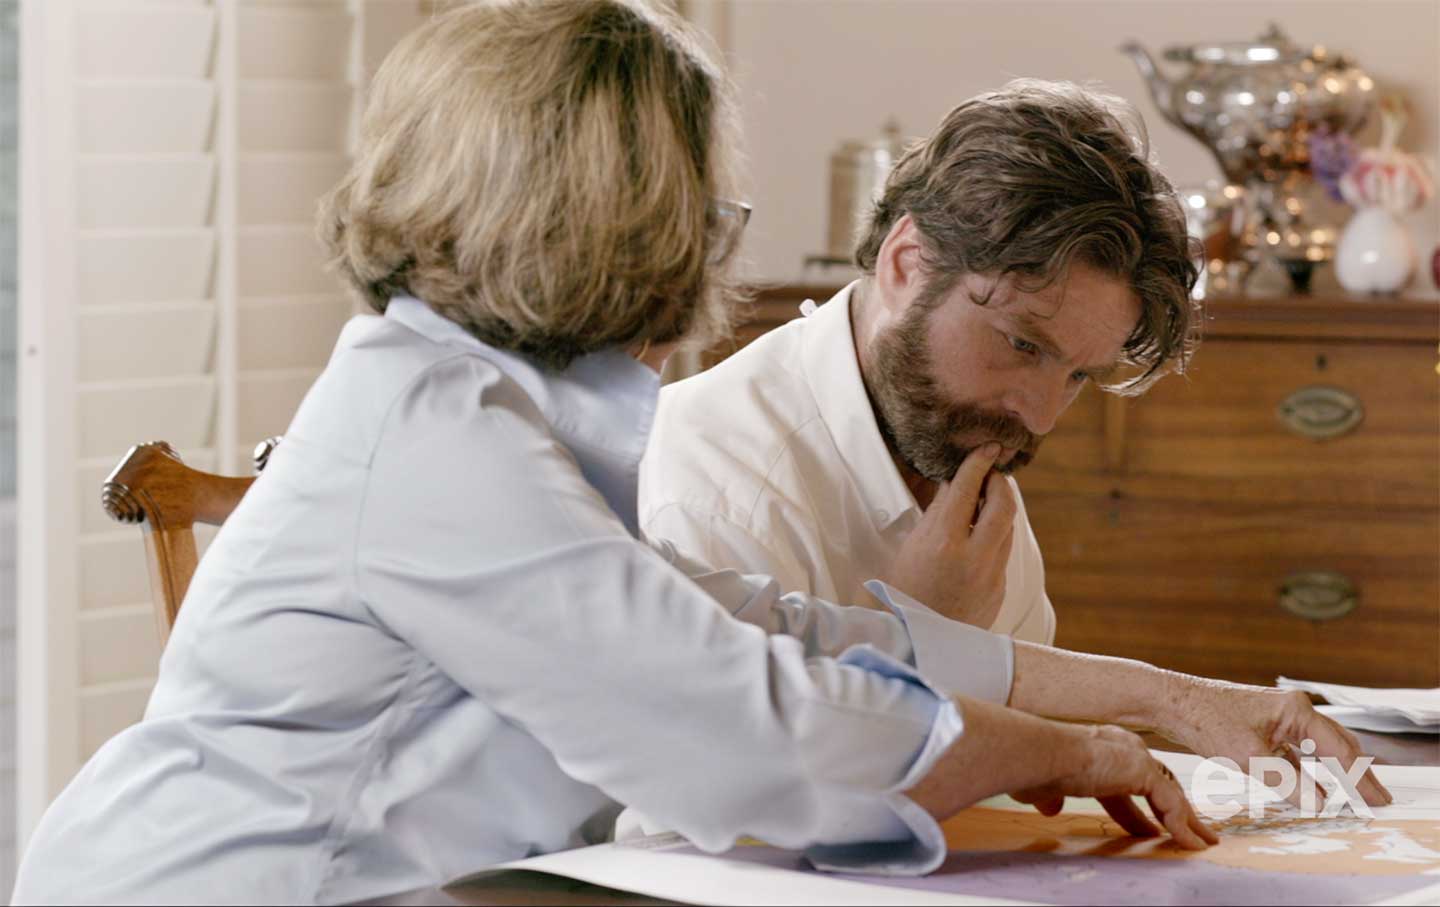 Exclusive: Zach Galifianakis Wants You to Know How Bad Gerrymandering Has Gotten